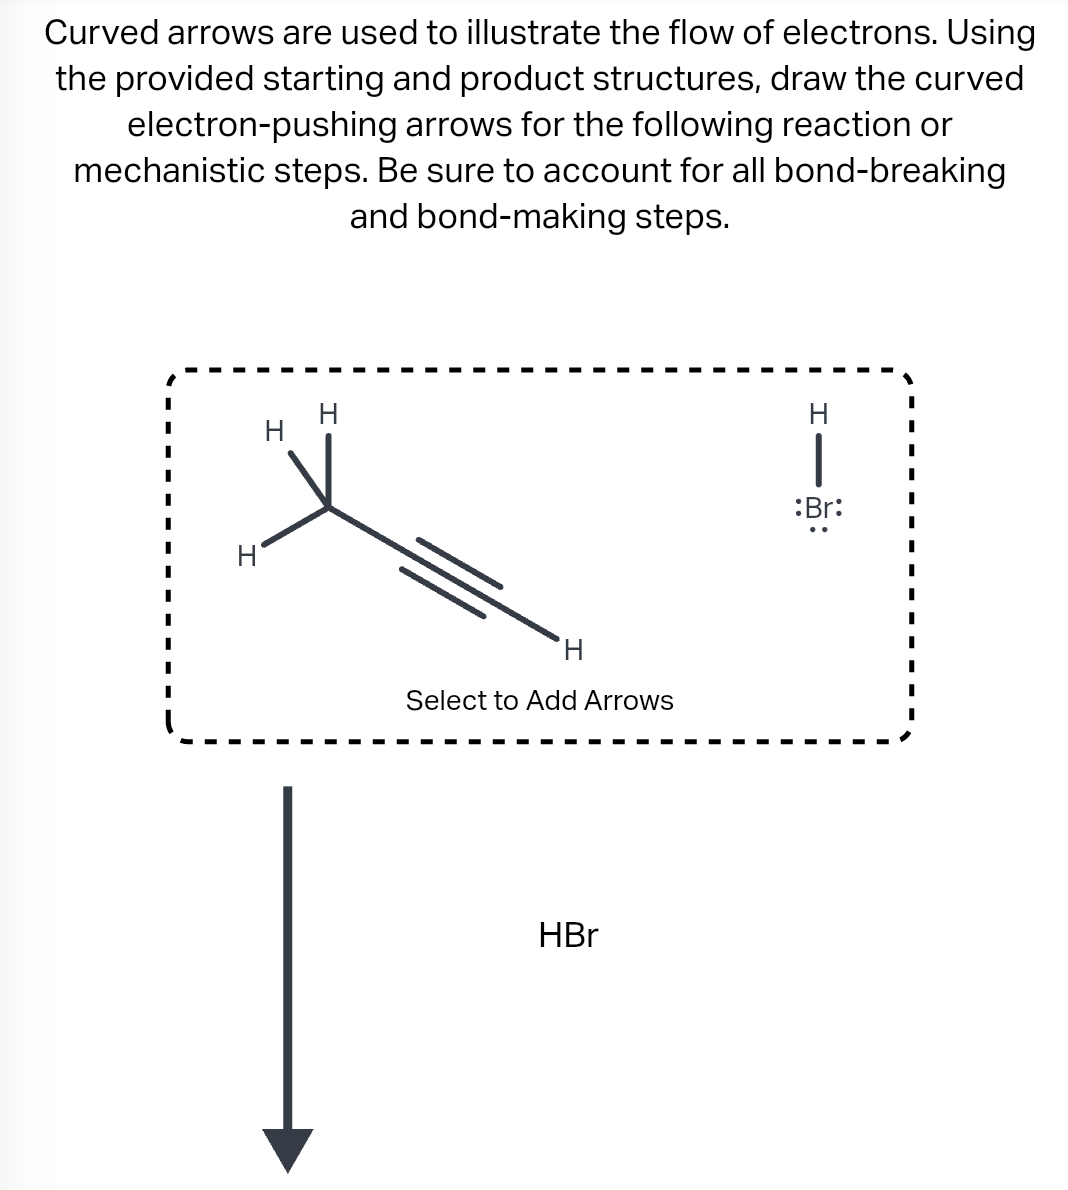 Curved arrows are used to illustrate the flow of electrons. Using
the provided starting and product structures, draw the curved
electron-pushing arrows for the following reaction or
mechanistic steps. Be sure to account for all bond-breaking
and bond-making steps.
H
H
H
Select to Add Arrows
HBr
H
1
:Br: